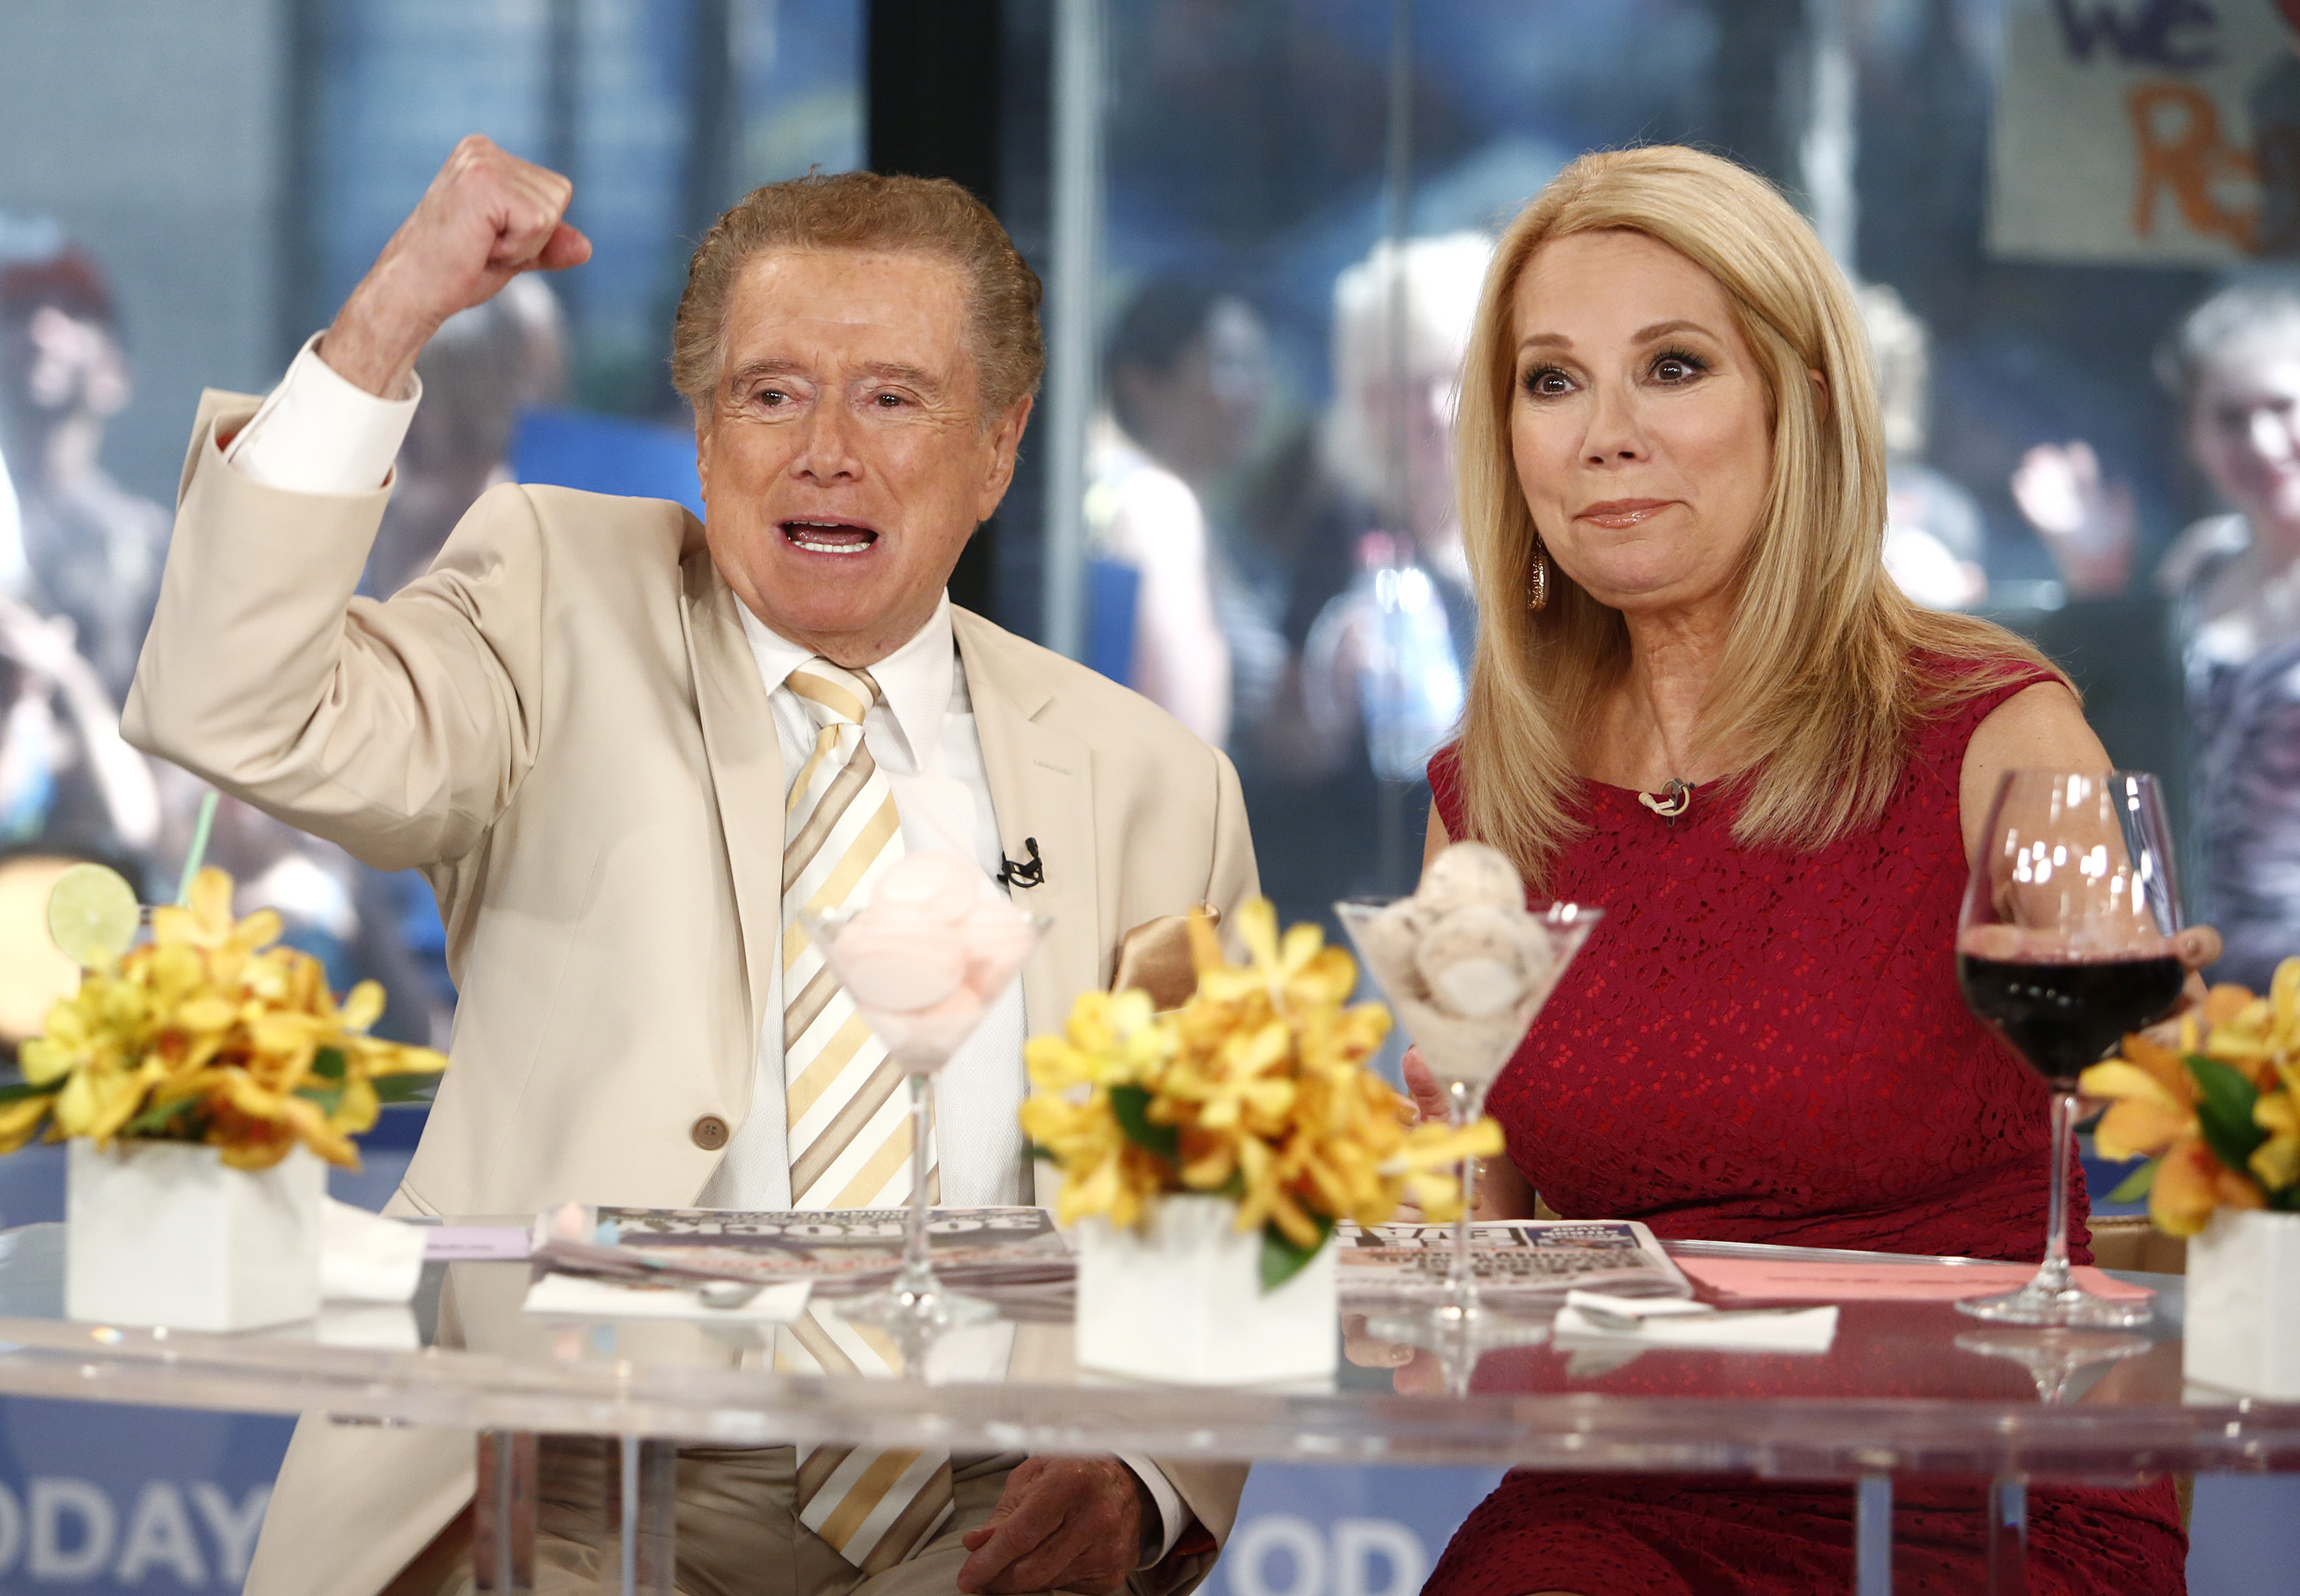 Regis Philbin and Kathie Lee Gifford on Today